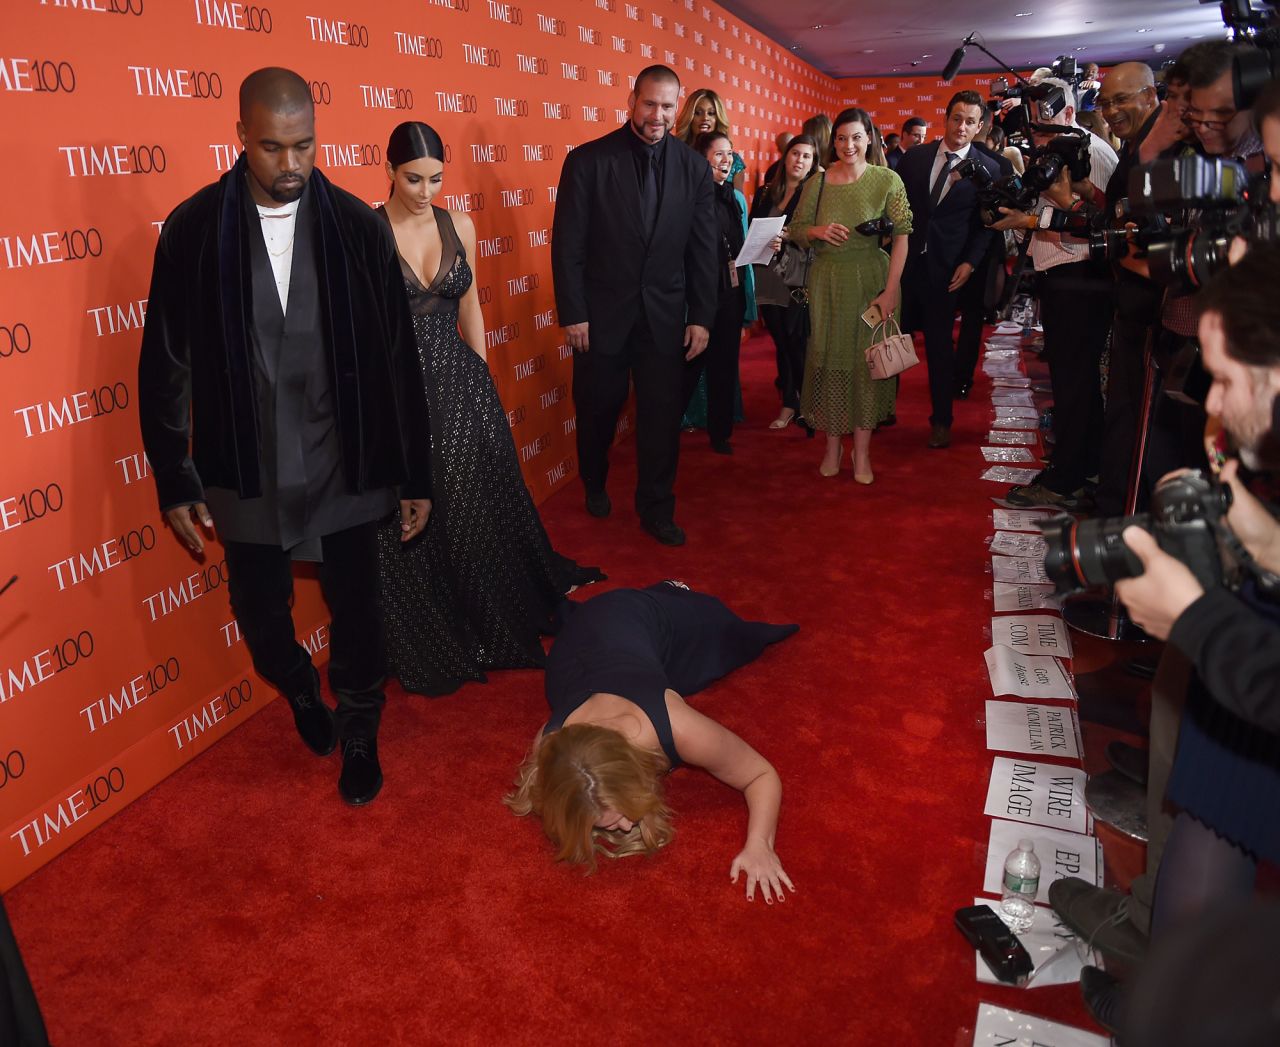 Comedian Amy Schumer pretends to <a href="https://www.cnn.com/2015/04/22/entertainment/amy-schumer-moment-feat/index.html" target="_blank">trip and fall</a> in front of West and Kardashian West as they attend the Time 100 Gala in 2015.